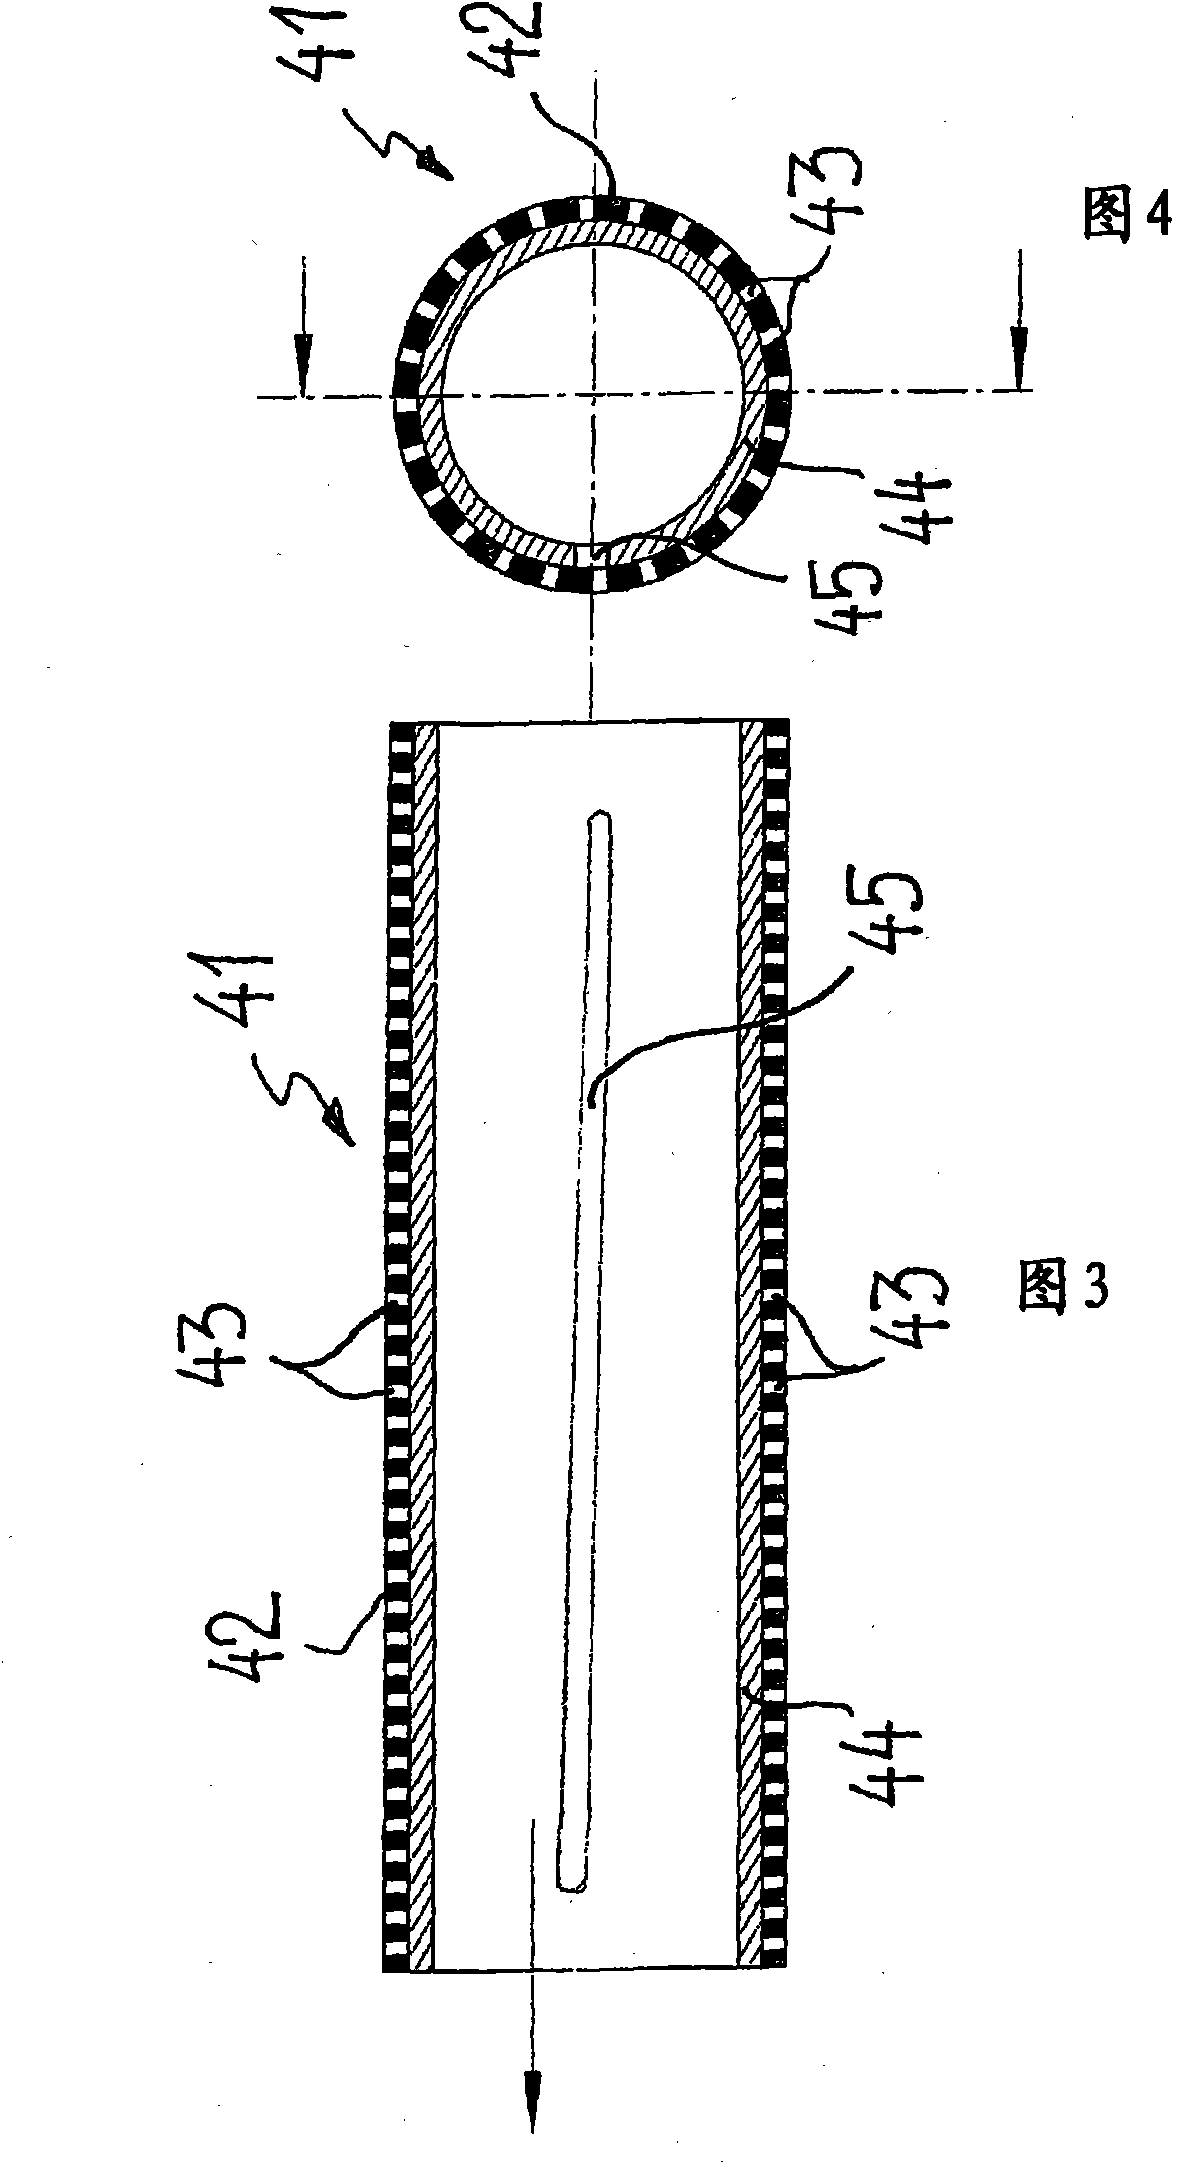 Knitting machine and method for producing knitted fabrics from rovings